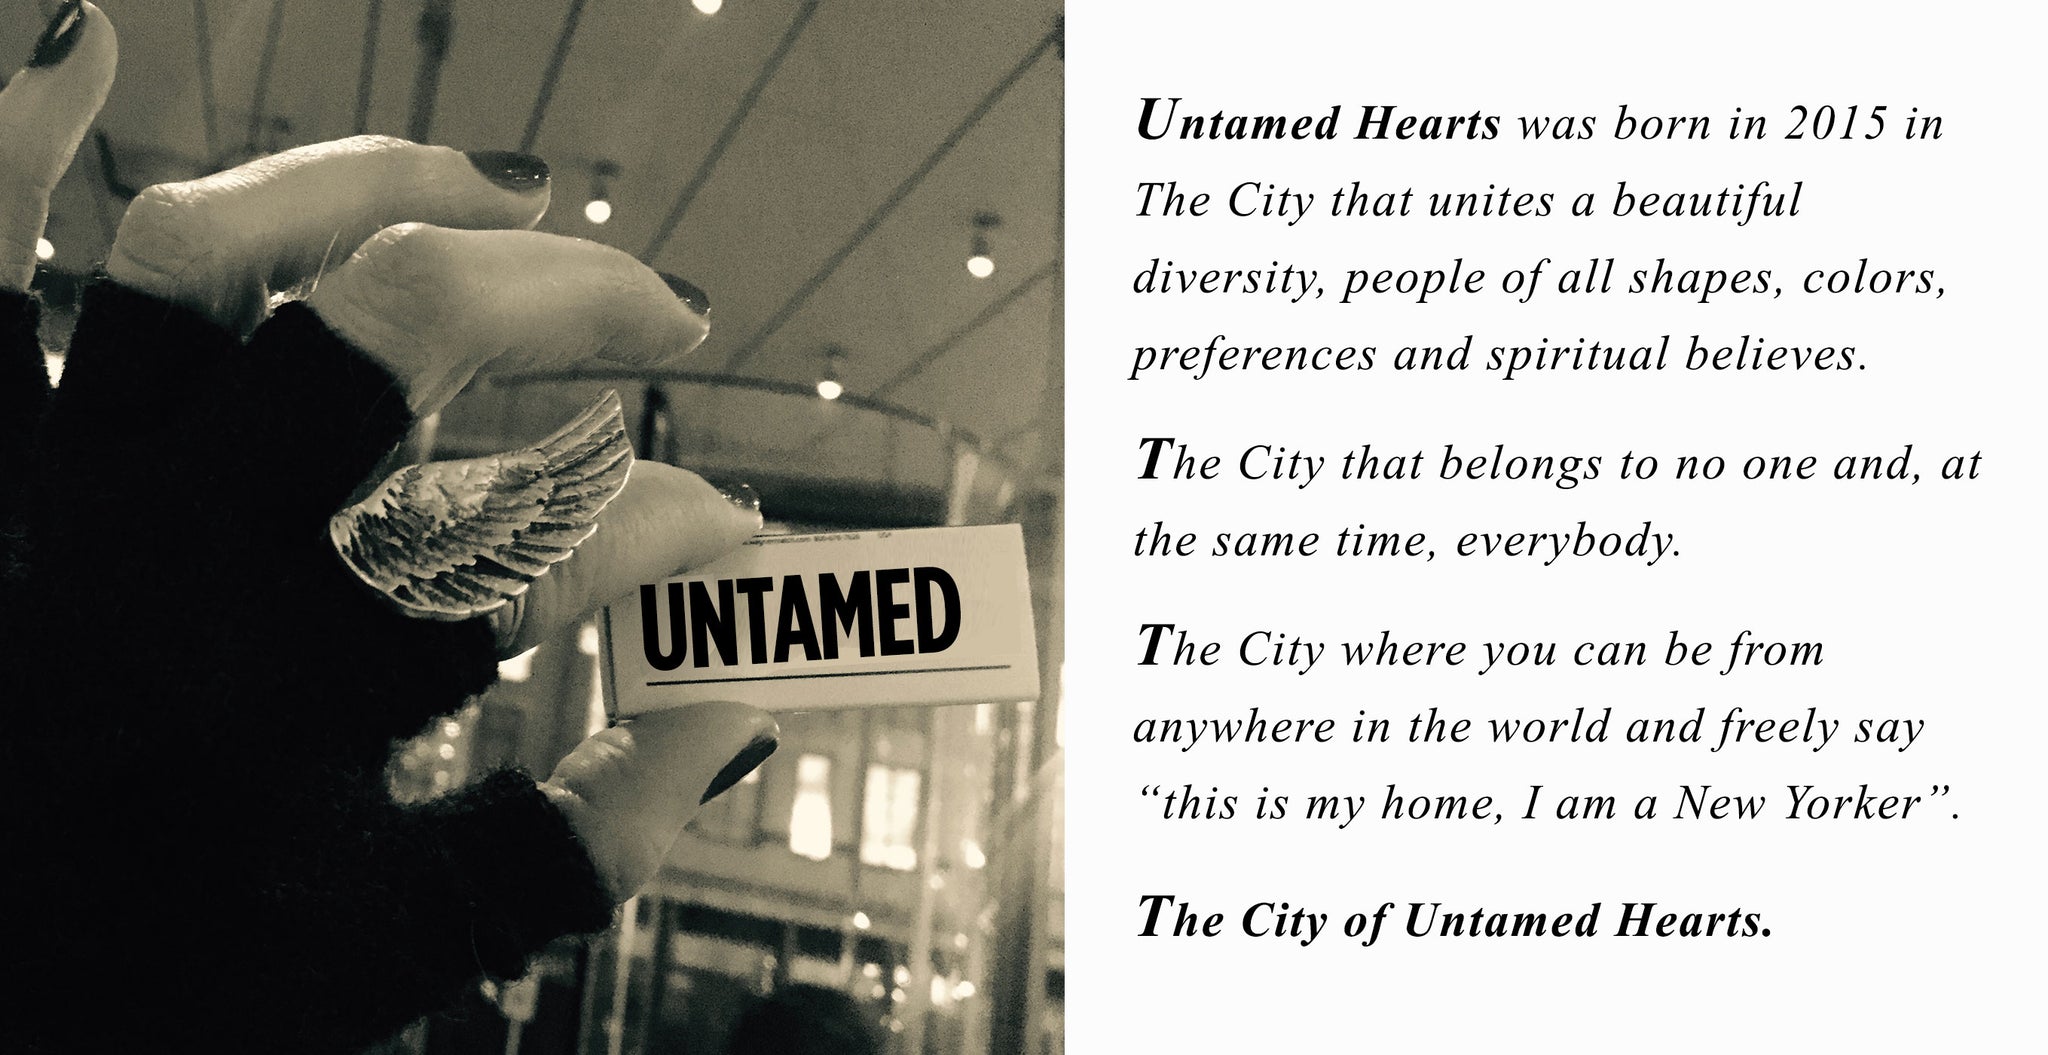 Untamed Hearts was born in 2015 in  The City that unites a beautiful  diversity, people of all shapes, colors,  preferences and spiritual believes.  The City that belongs to no one and, at the same time, everybody.  The City where you can be from  anywhere in the world and freely say “this is my home, I am a New Yorker”.  The City of Untamed Hearts. 